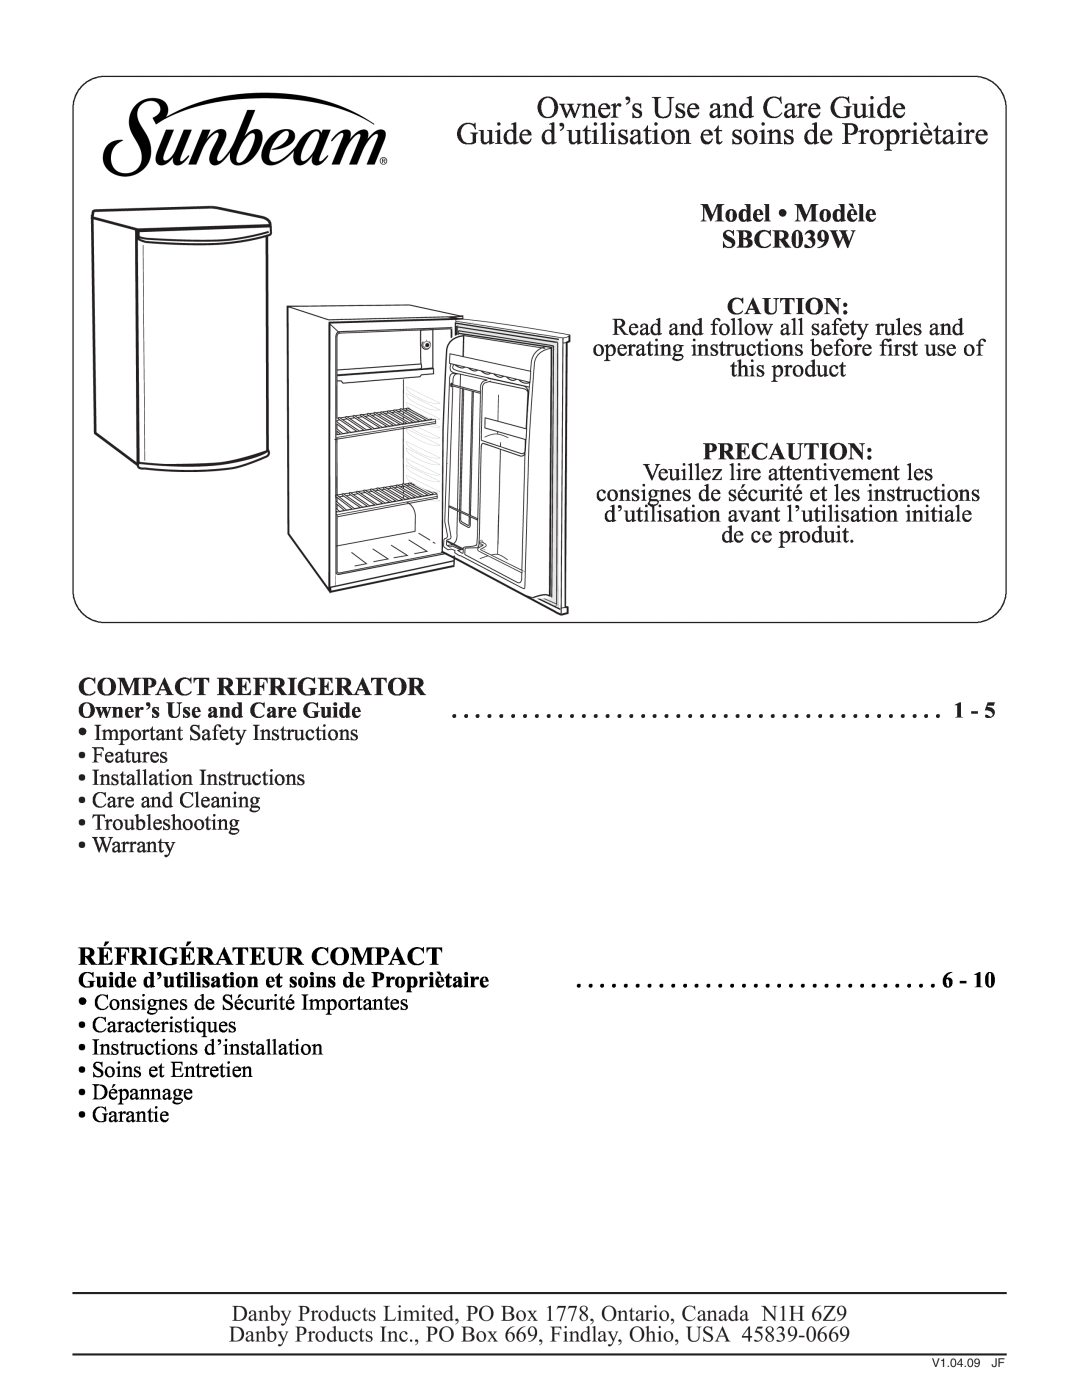 Sunbeam important safety instructions Model Modèle SBCR039W, Compact Refrigerator, Owner’s Use and Care Guide 